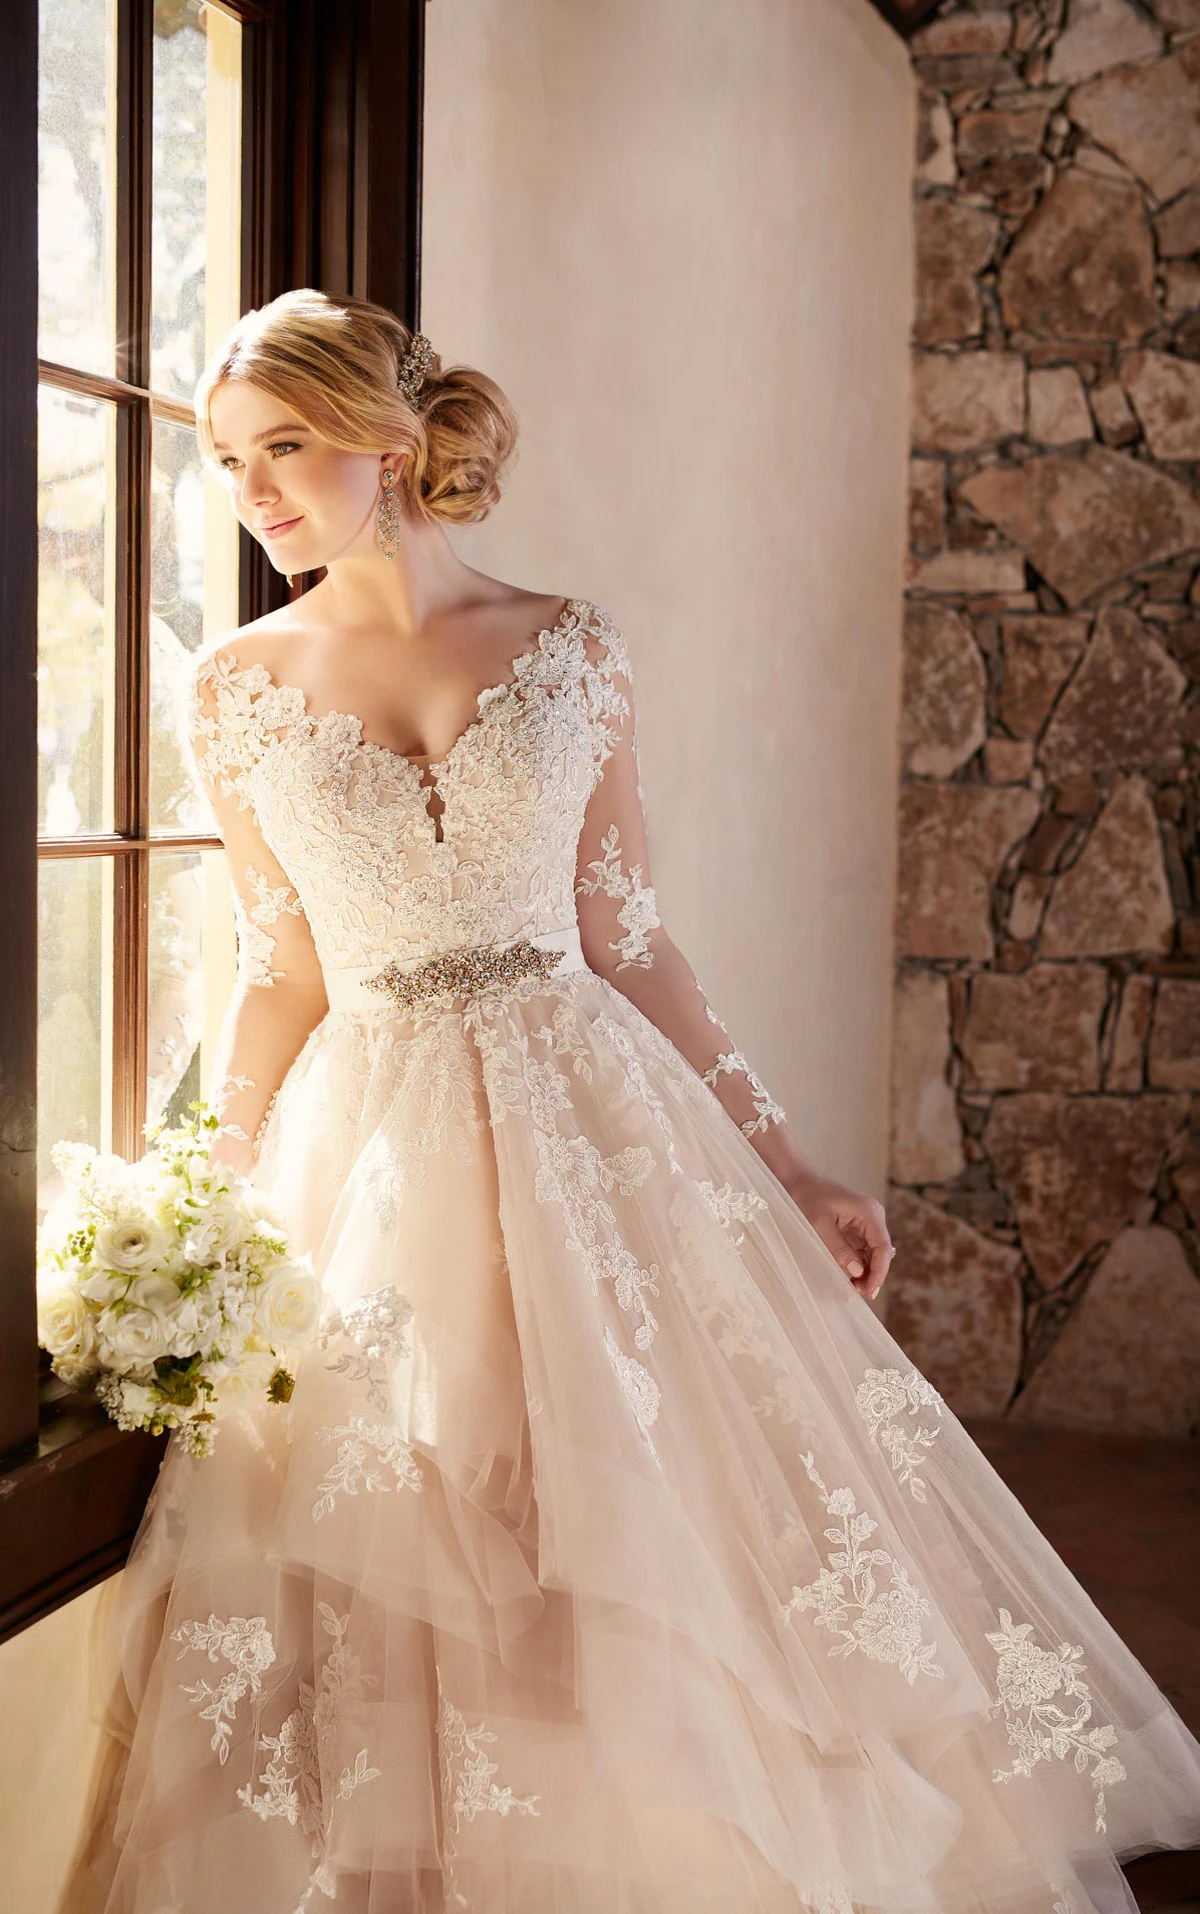 Sleeved tulle wedding dress with illusion lace Essense